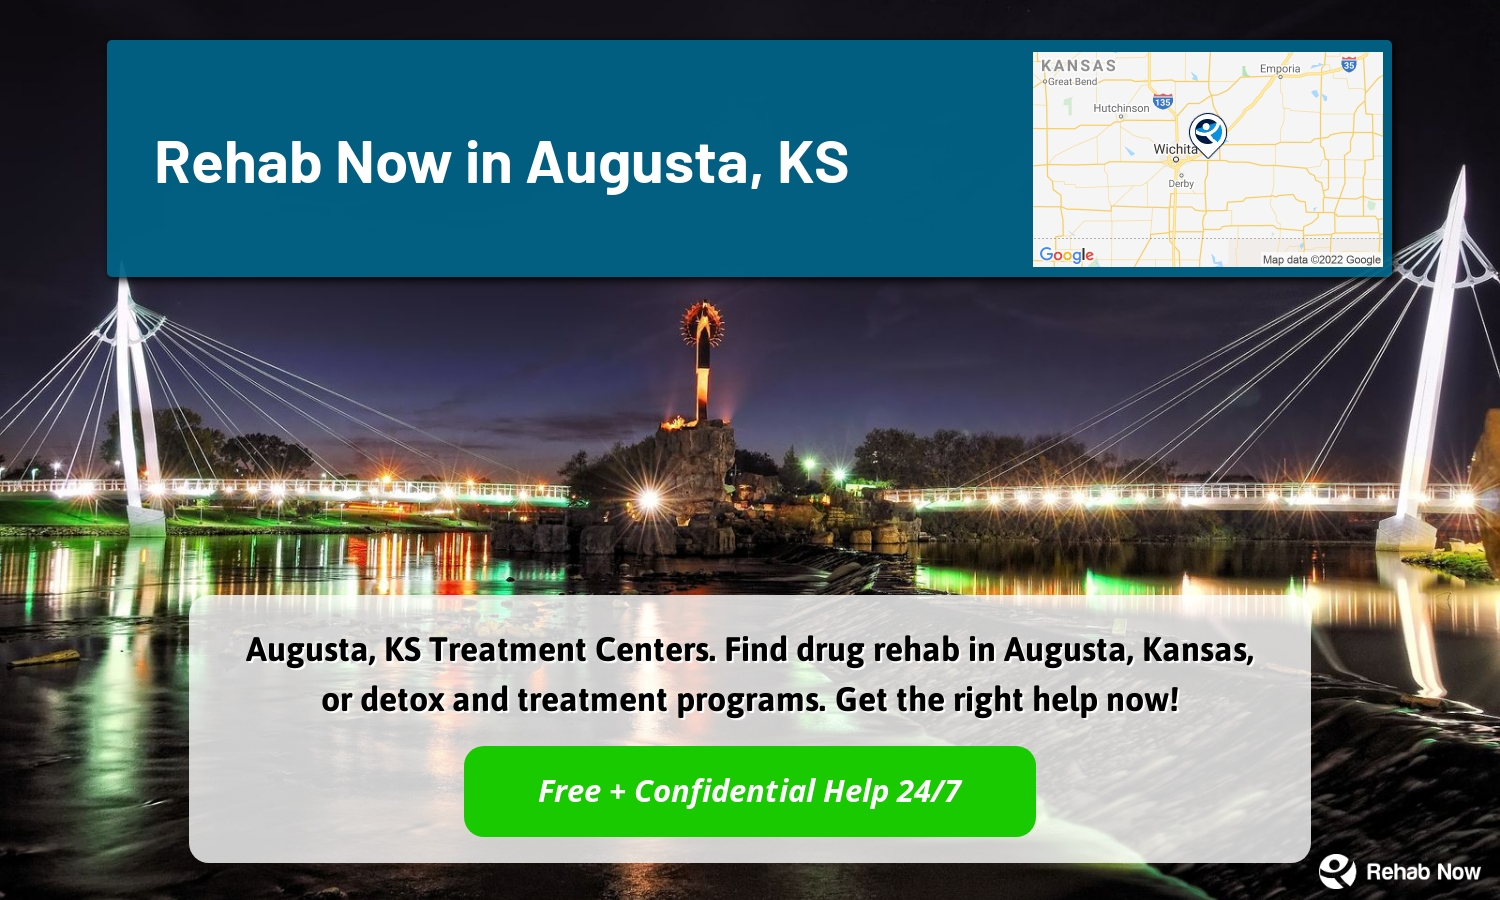 Augusta, KS Treatment Centers. Find drug rehab in Augusta, Kansas, or detox and treatment programs. Get the right help now!